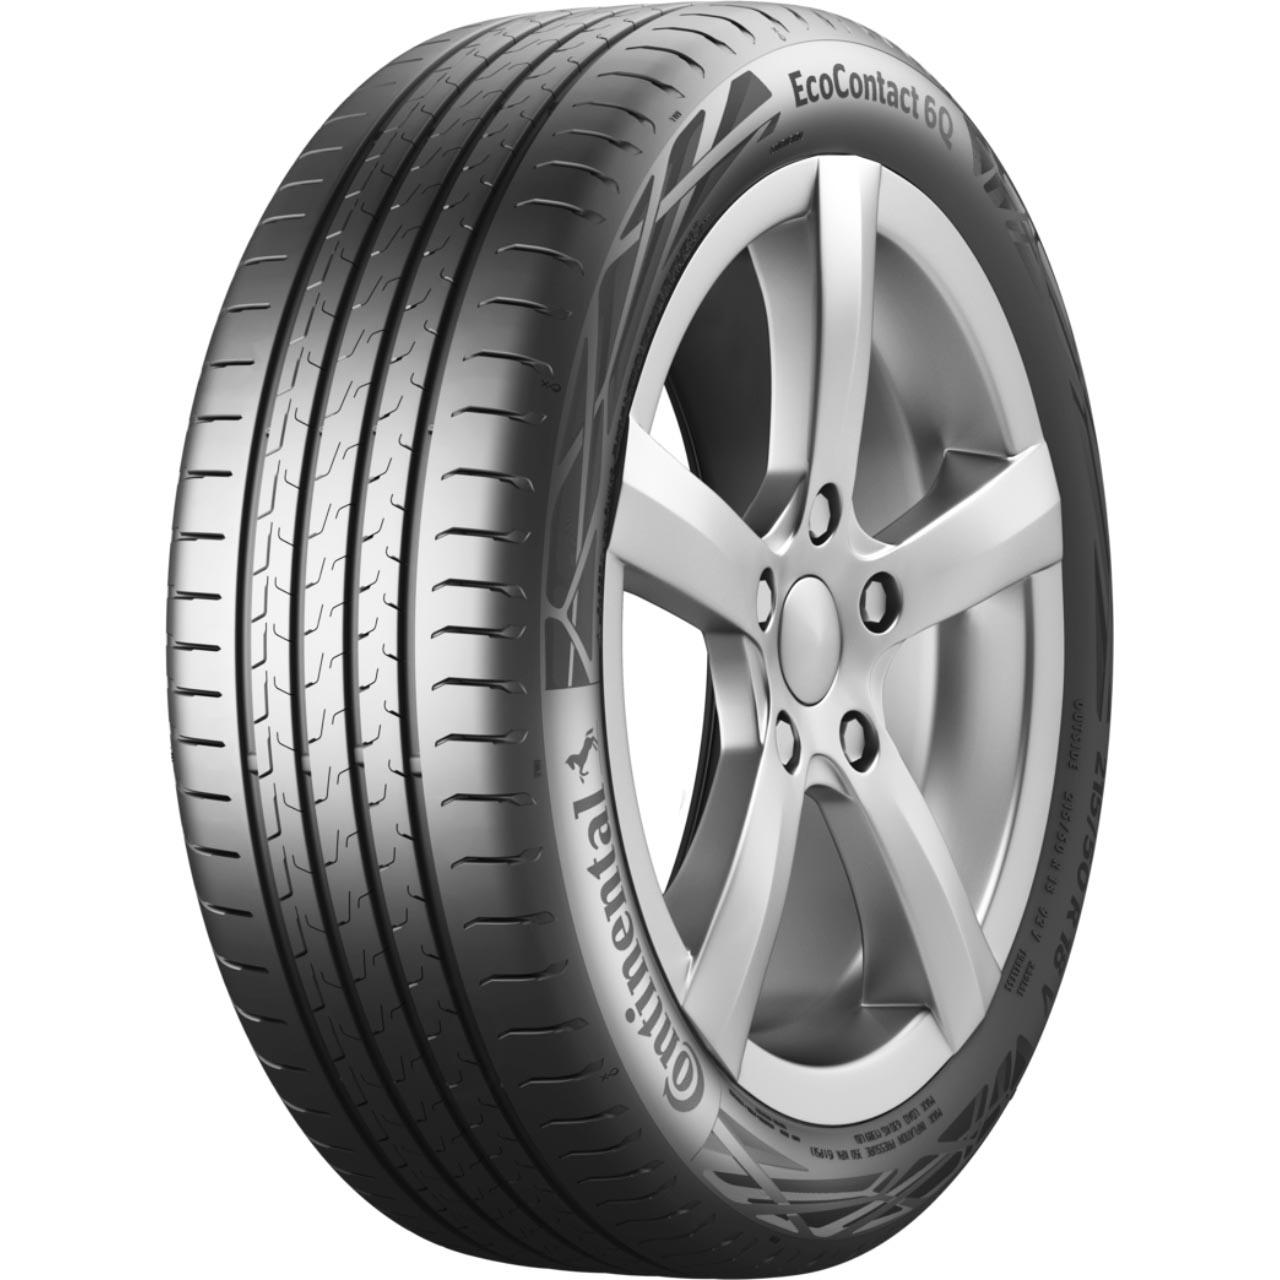 Continental ECOCONTACT 6Q 215/50R18 92V FOR